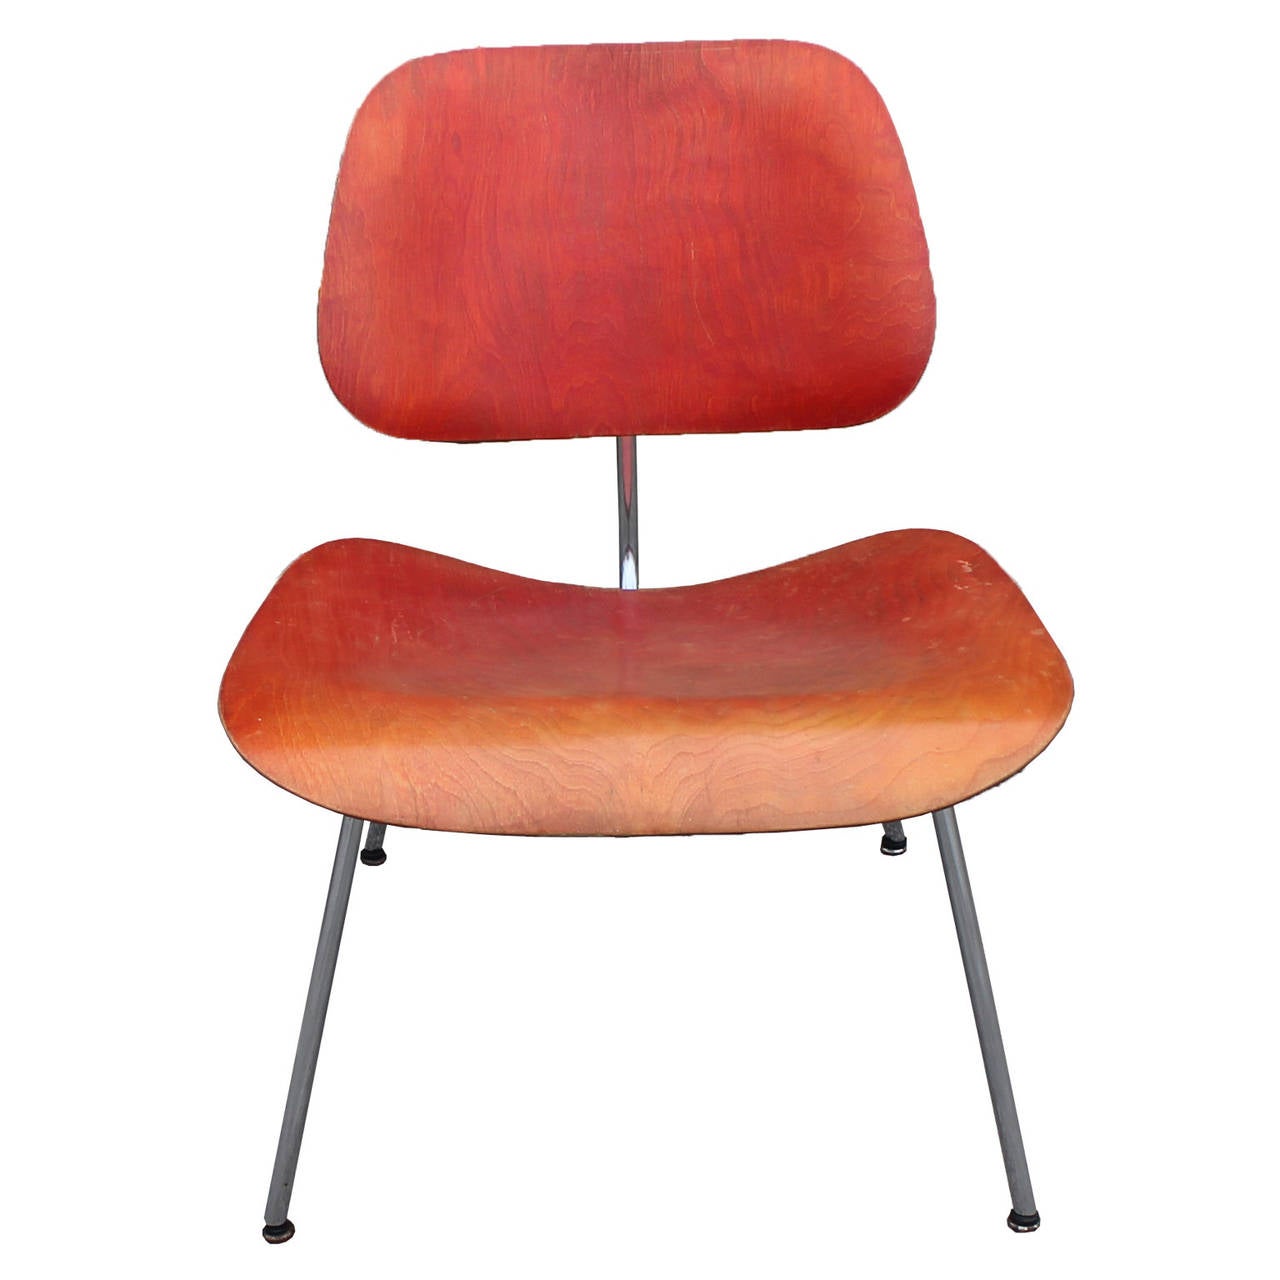 Stunning Eames LCM chair in red. Original red aniline dye finish with a wonderful patina. Classic plywood seat and back on steel frame. In wonderful vintage condition.